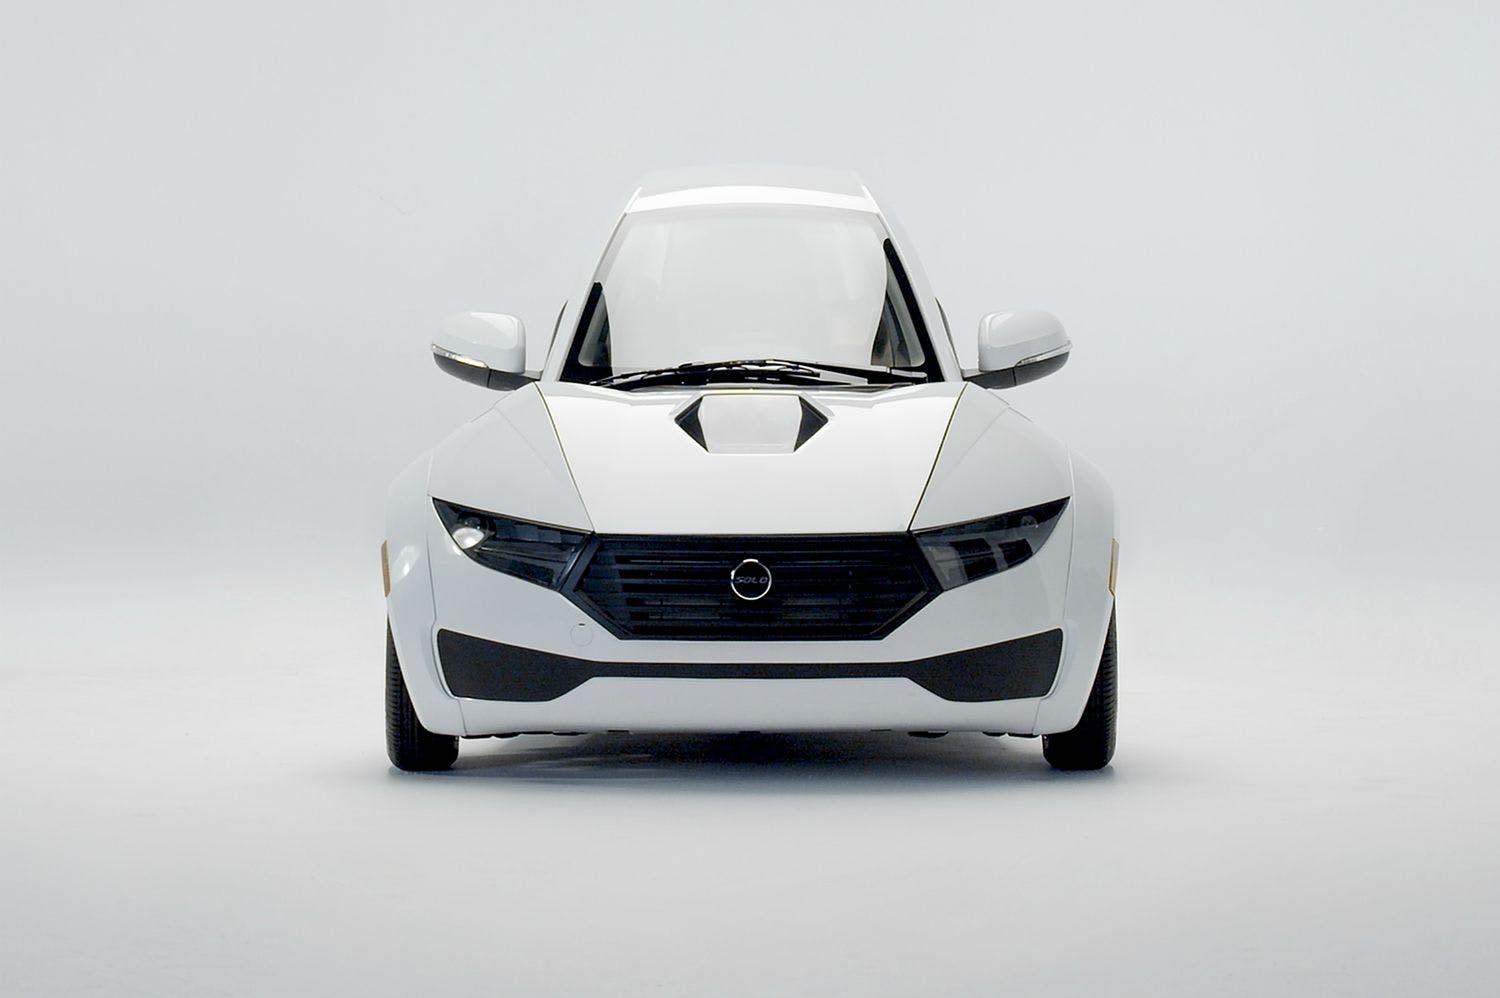 LAMag: This Single-Seat Electric Vehicle Is Positioning Itself as the Perfect Pandemic Ride